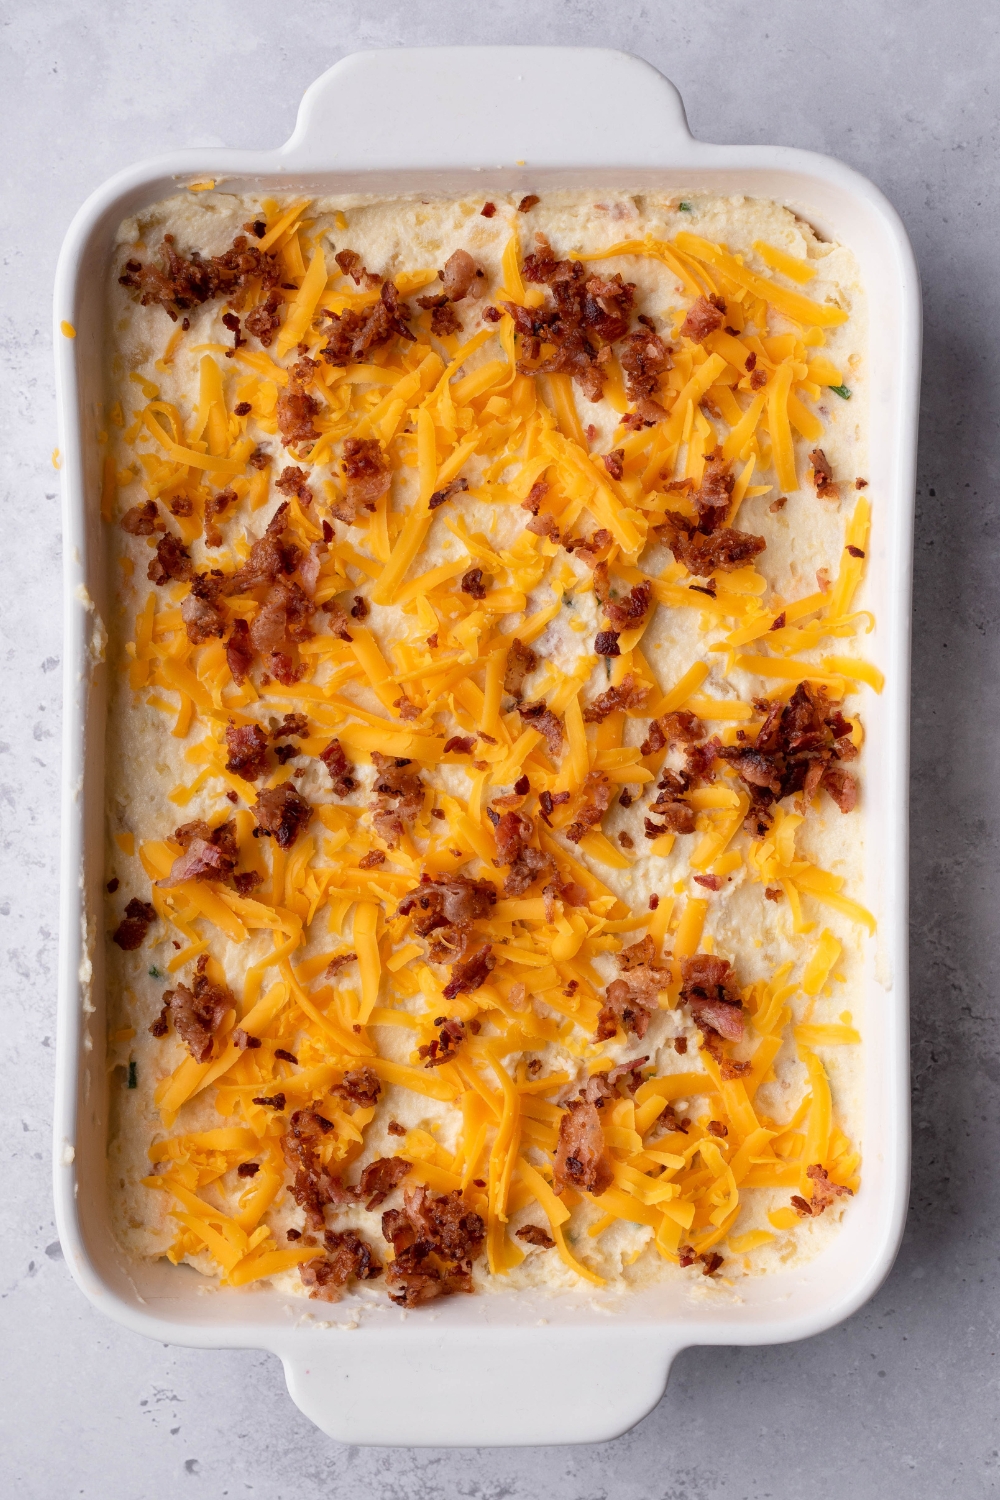 A baking casserole dish with unbaked potato casserole topped with extra bacon bits and shredded cheese on top.